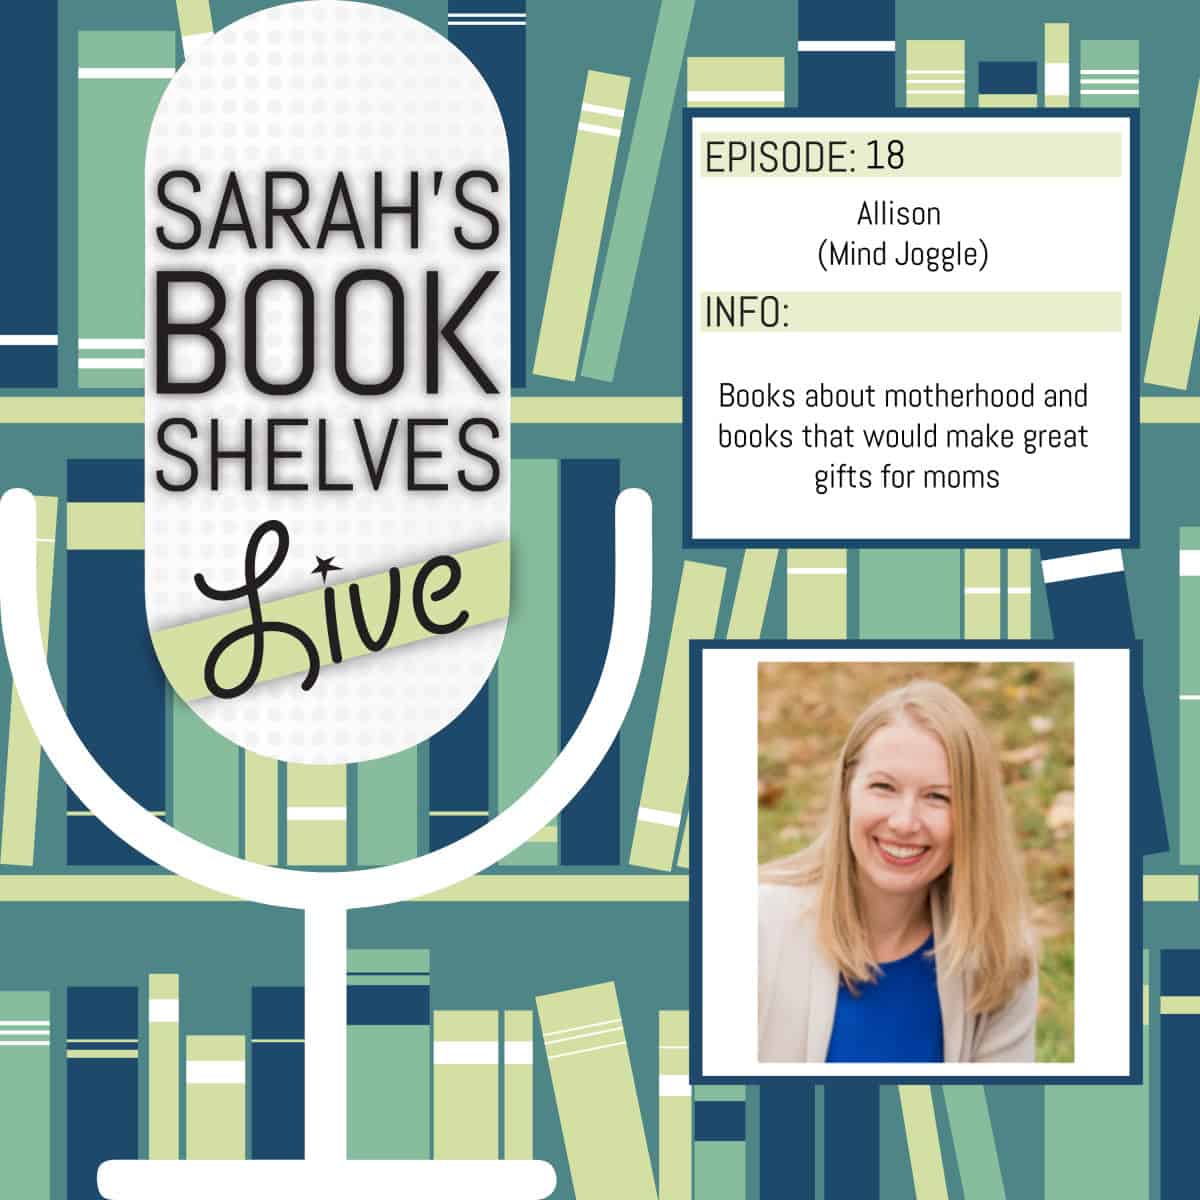 Sarah's Book Shelves Live Podcast Episode - books about motherhood and gifts for moms